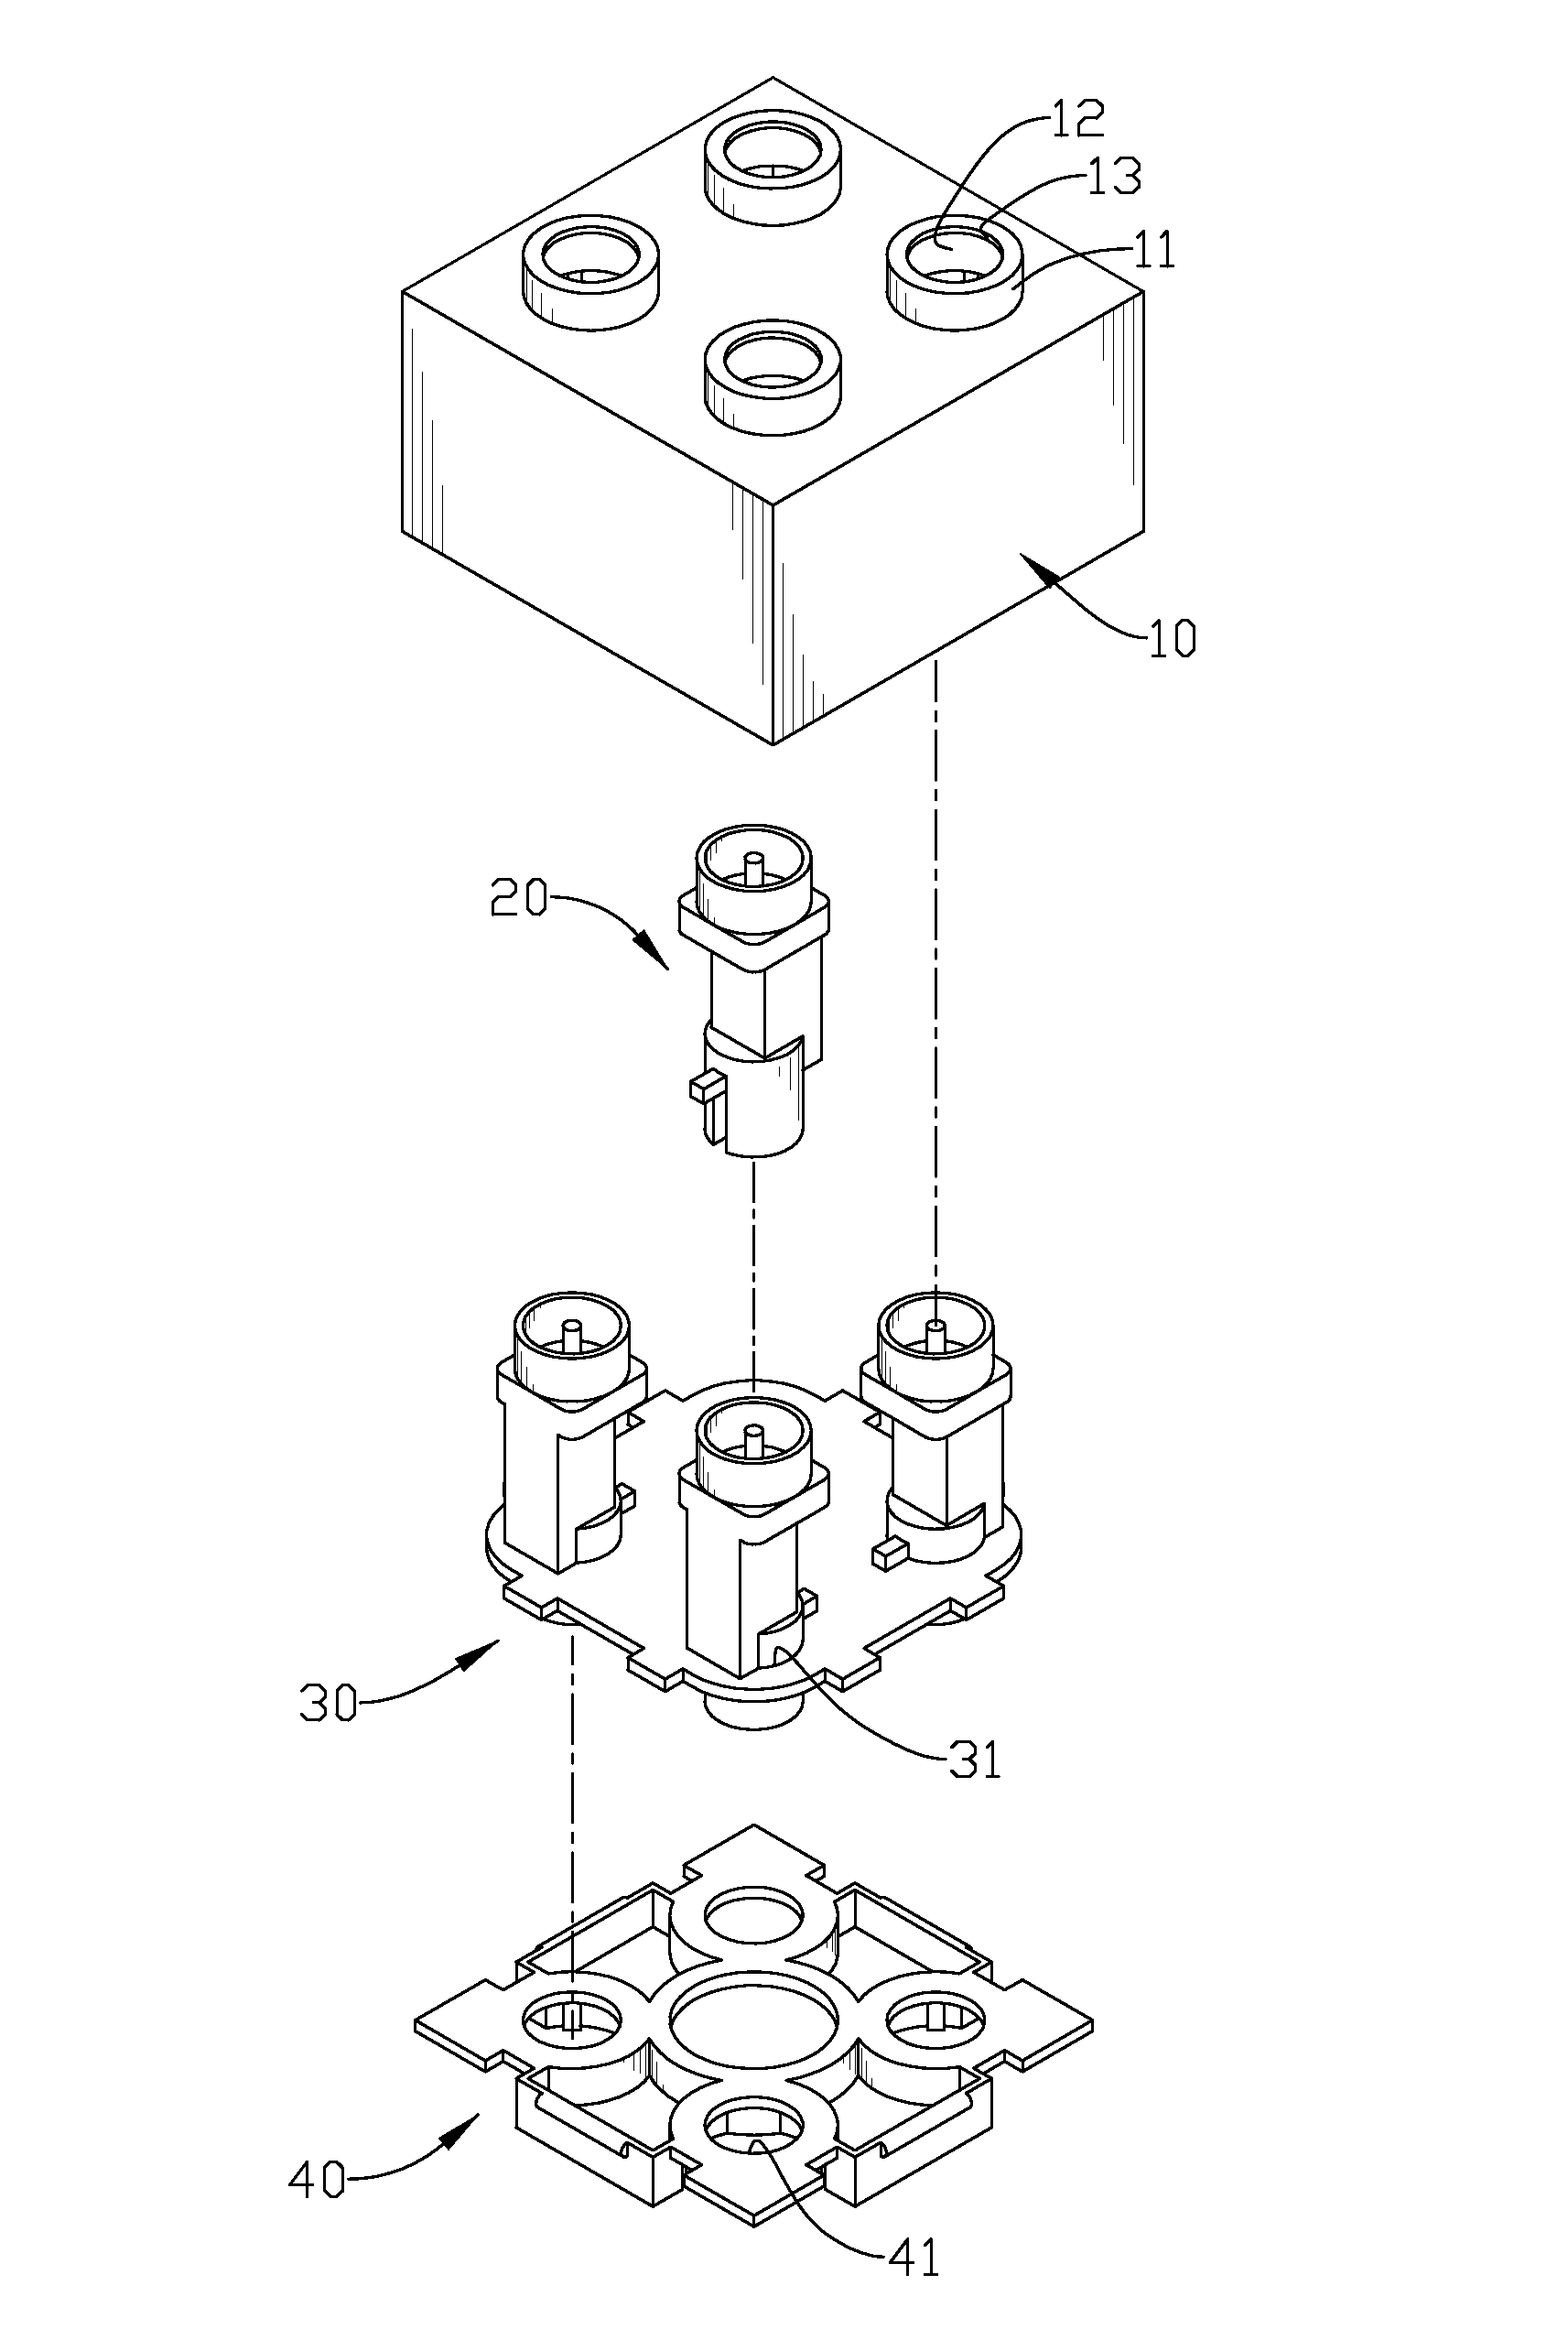 Modularized contact type of conductive building block